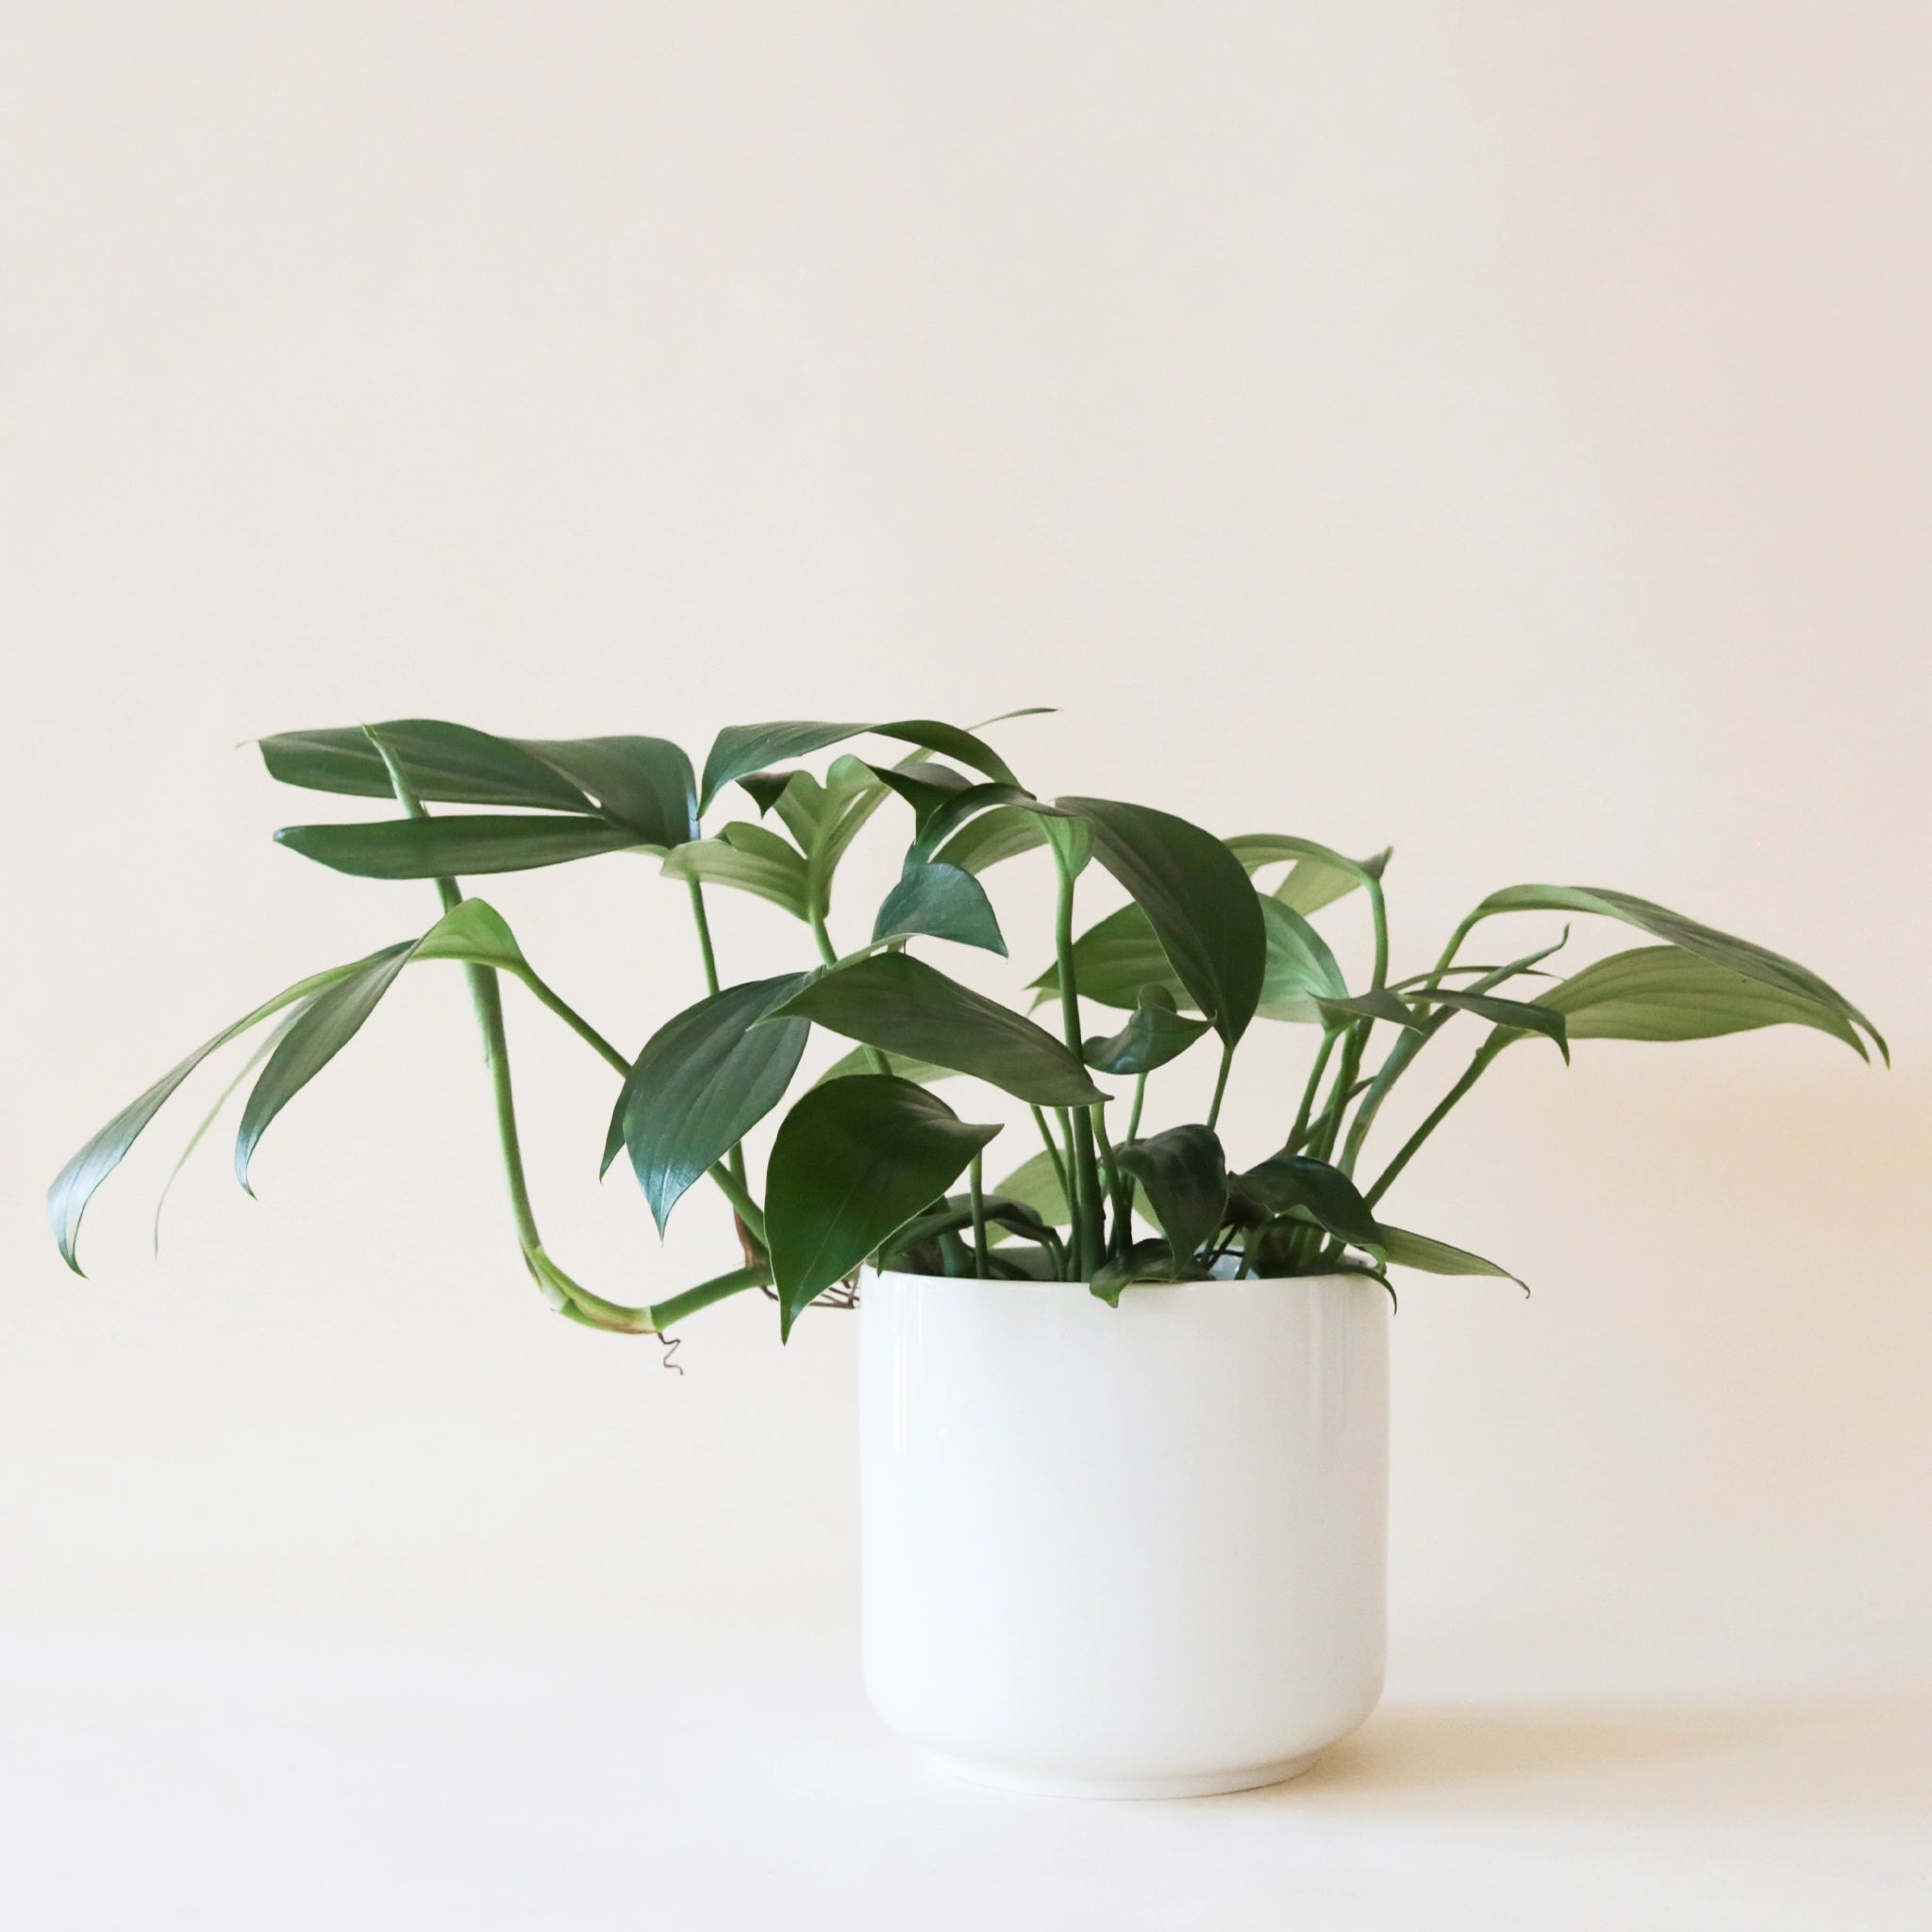 On a neutral background is a Raphidophora Decursiva in a white ceramic planter that is not included with purchase. 